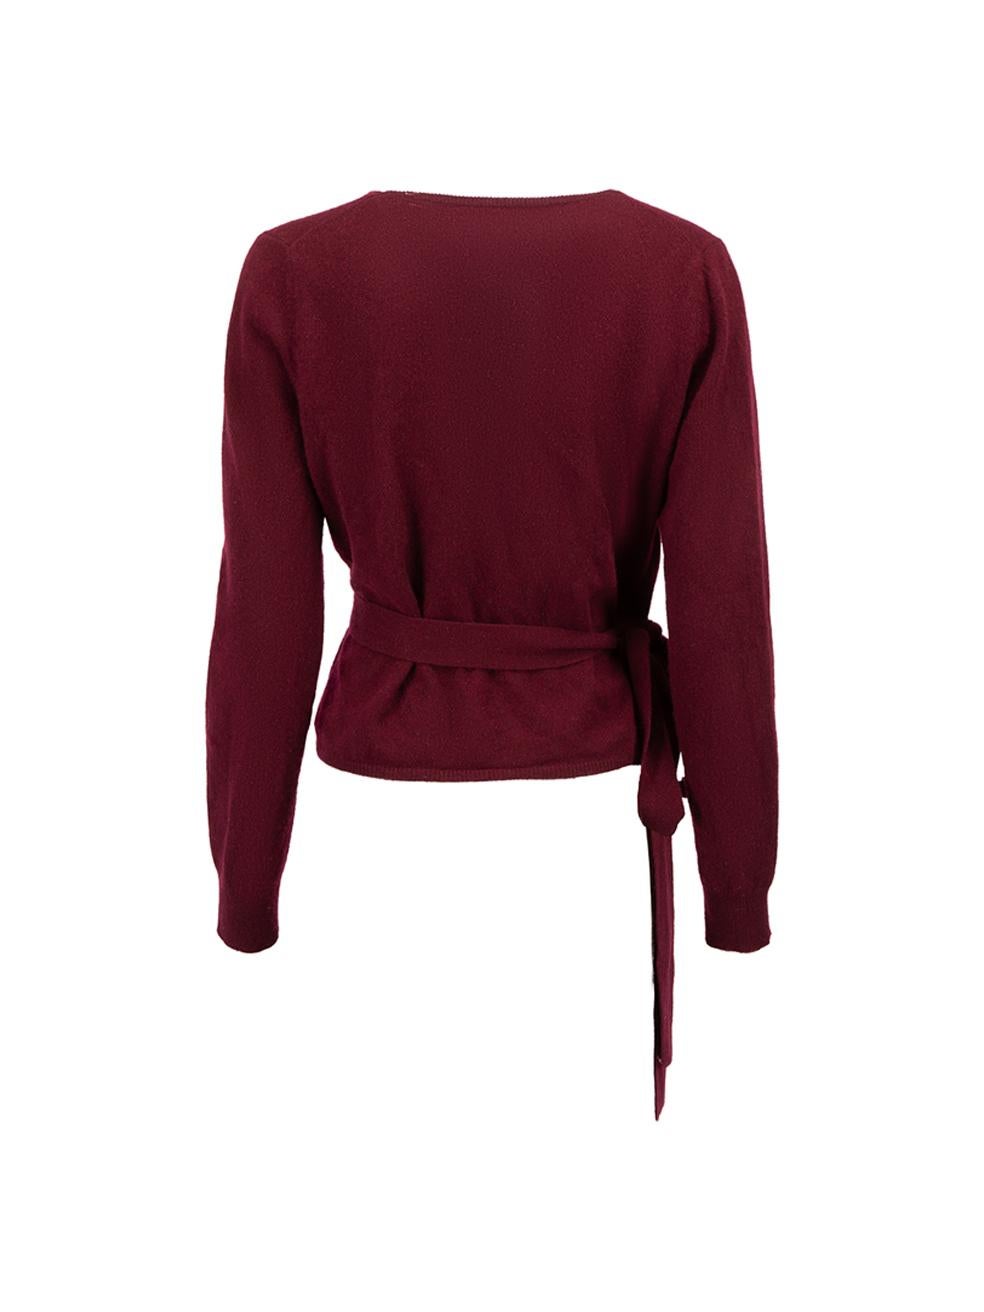 Burgundy Cashmere Wrapped Cardigan Size M In Good Condition For Sale In London, GB